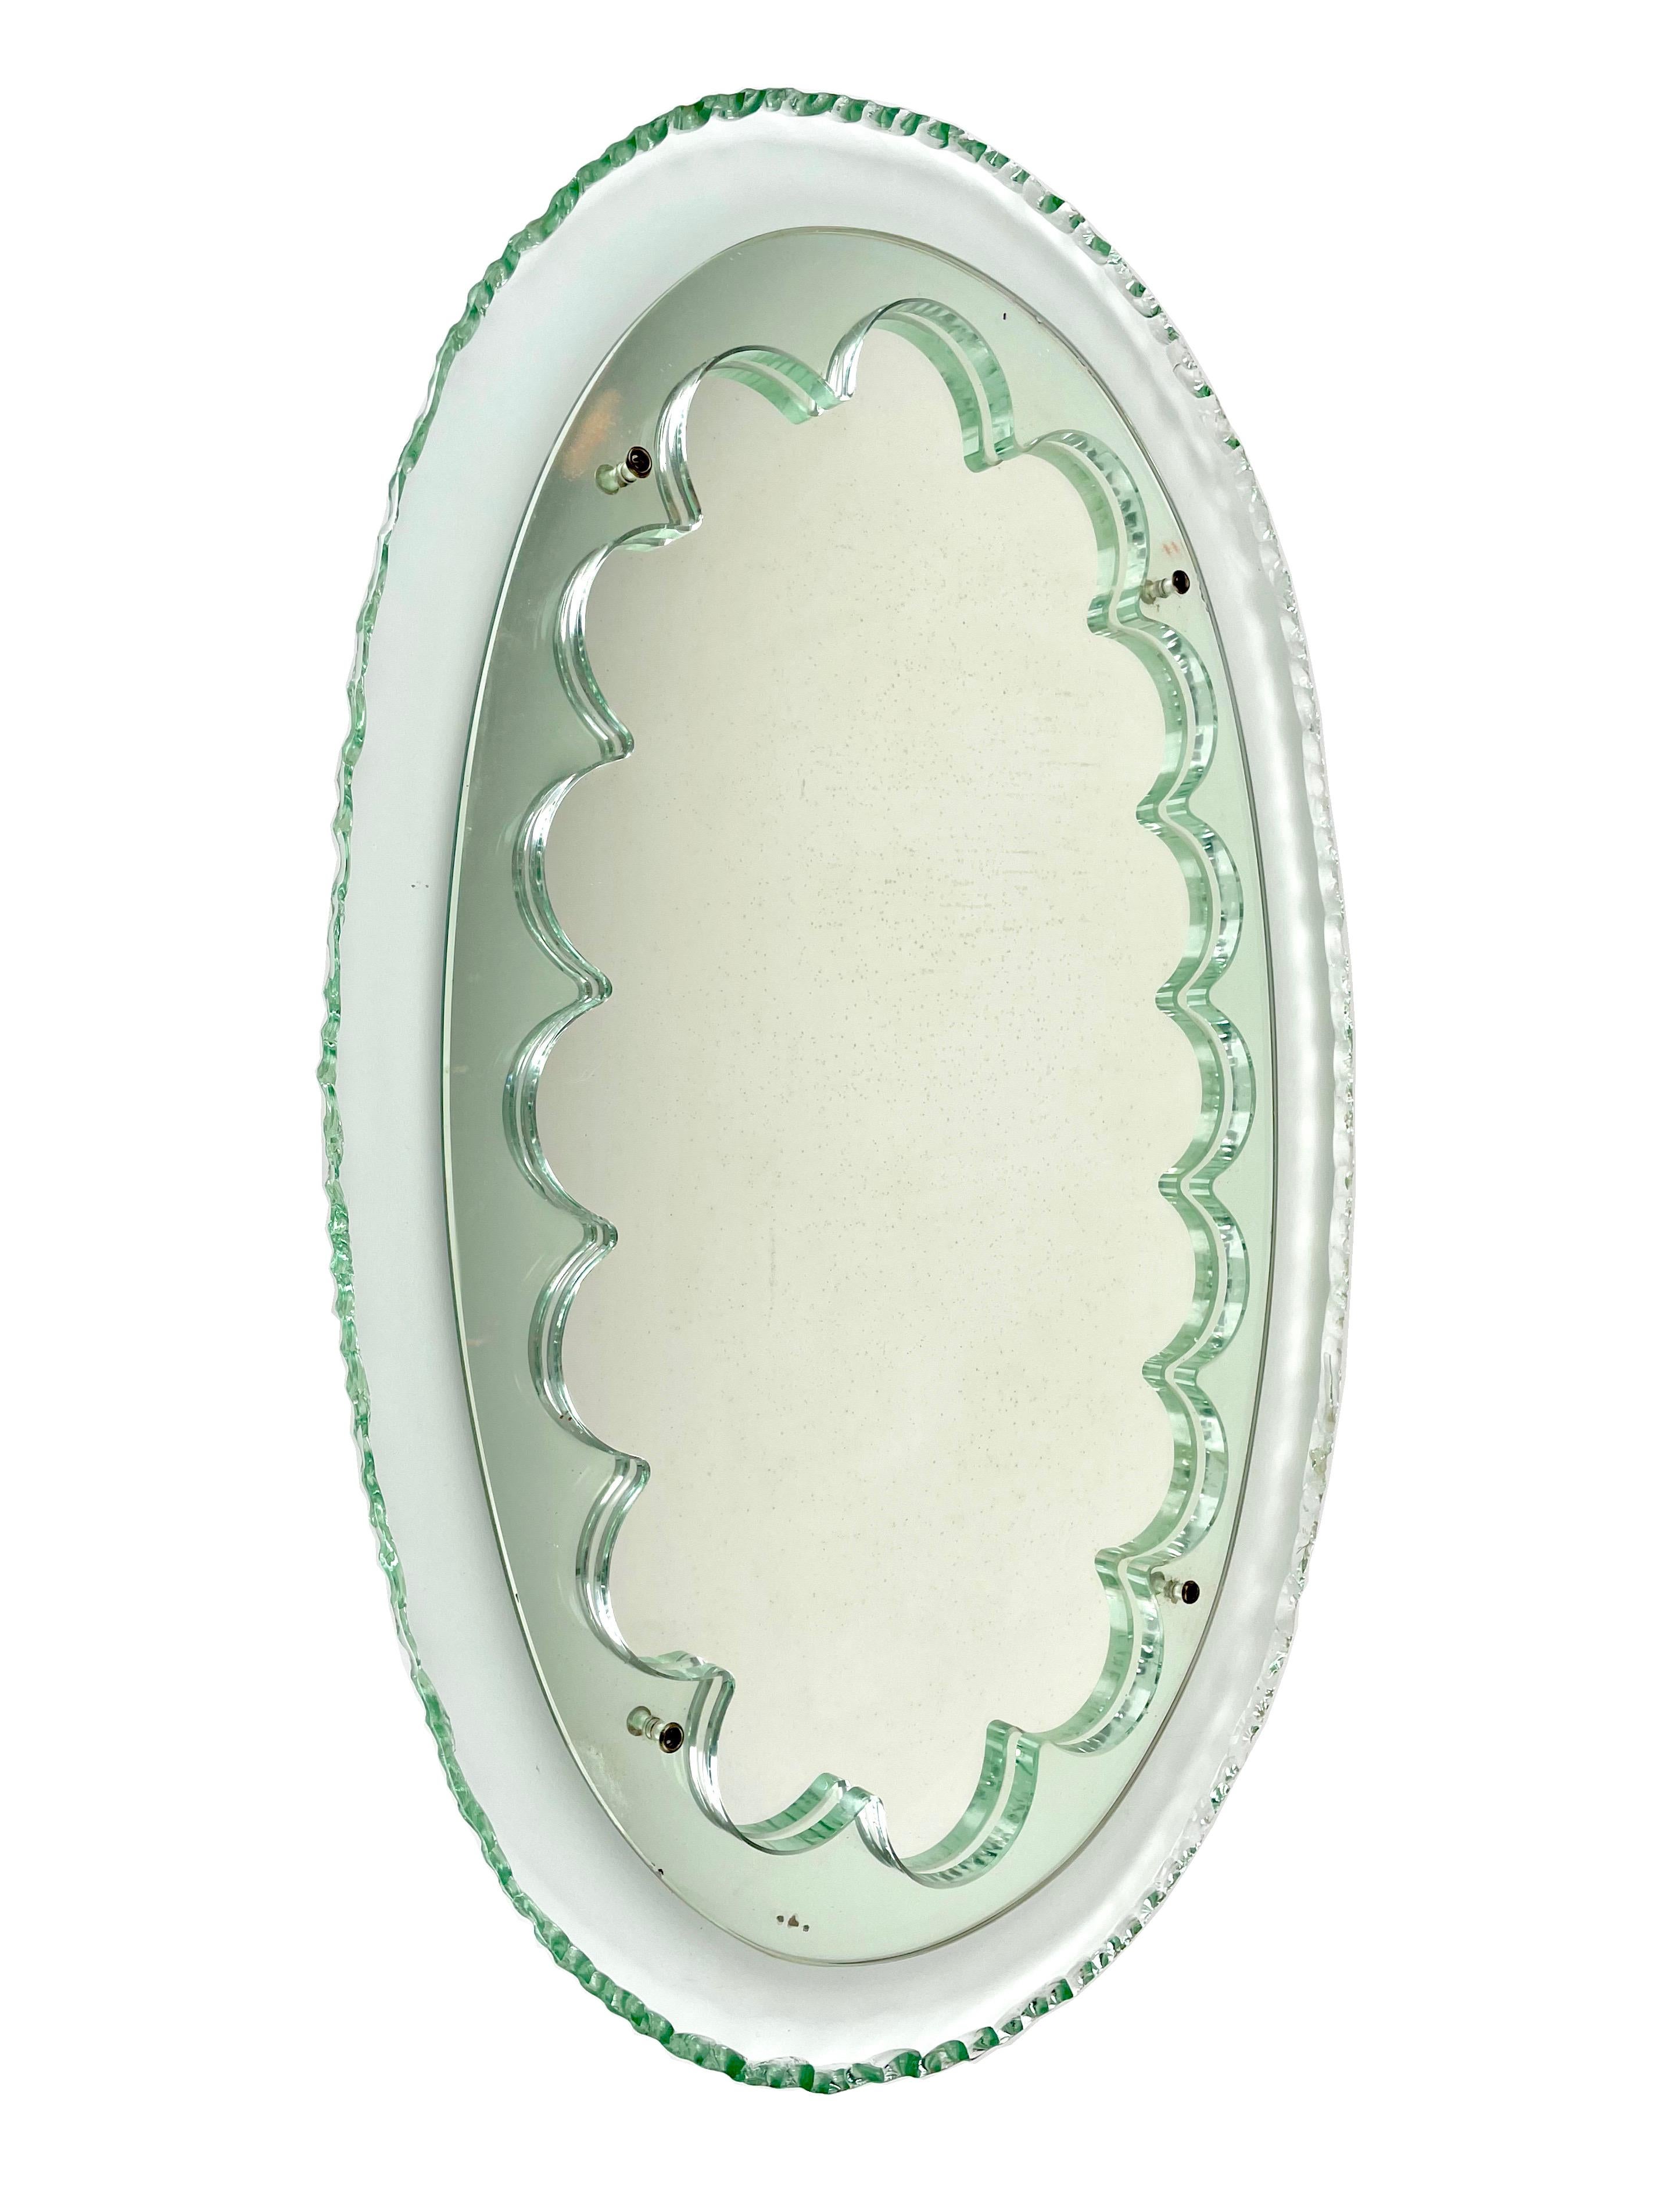 Rare wall mirror in green glass in the style of Max Ingrand for Fontana Arte, Italy, 1950s. 

Oval shape for the glass frame with chiseled edge decoration. In the center, original central flat mirror set in glass curlicues.